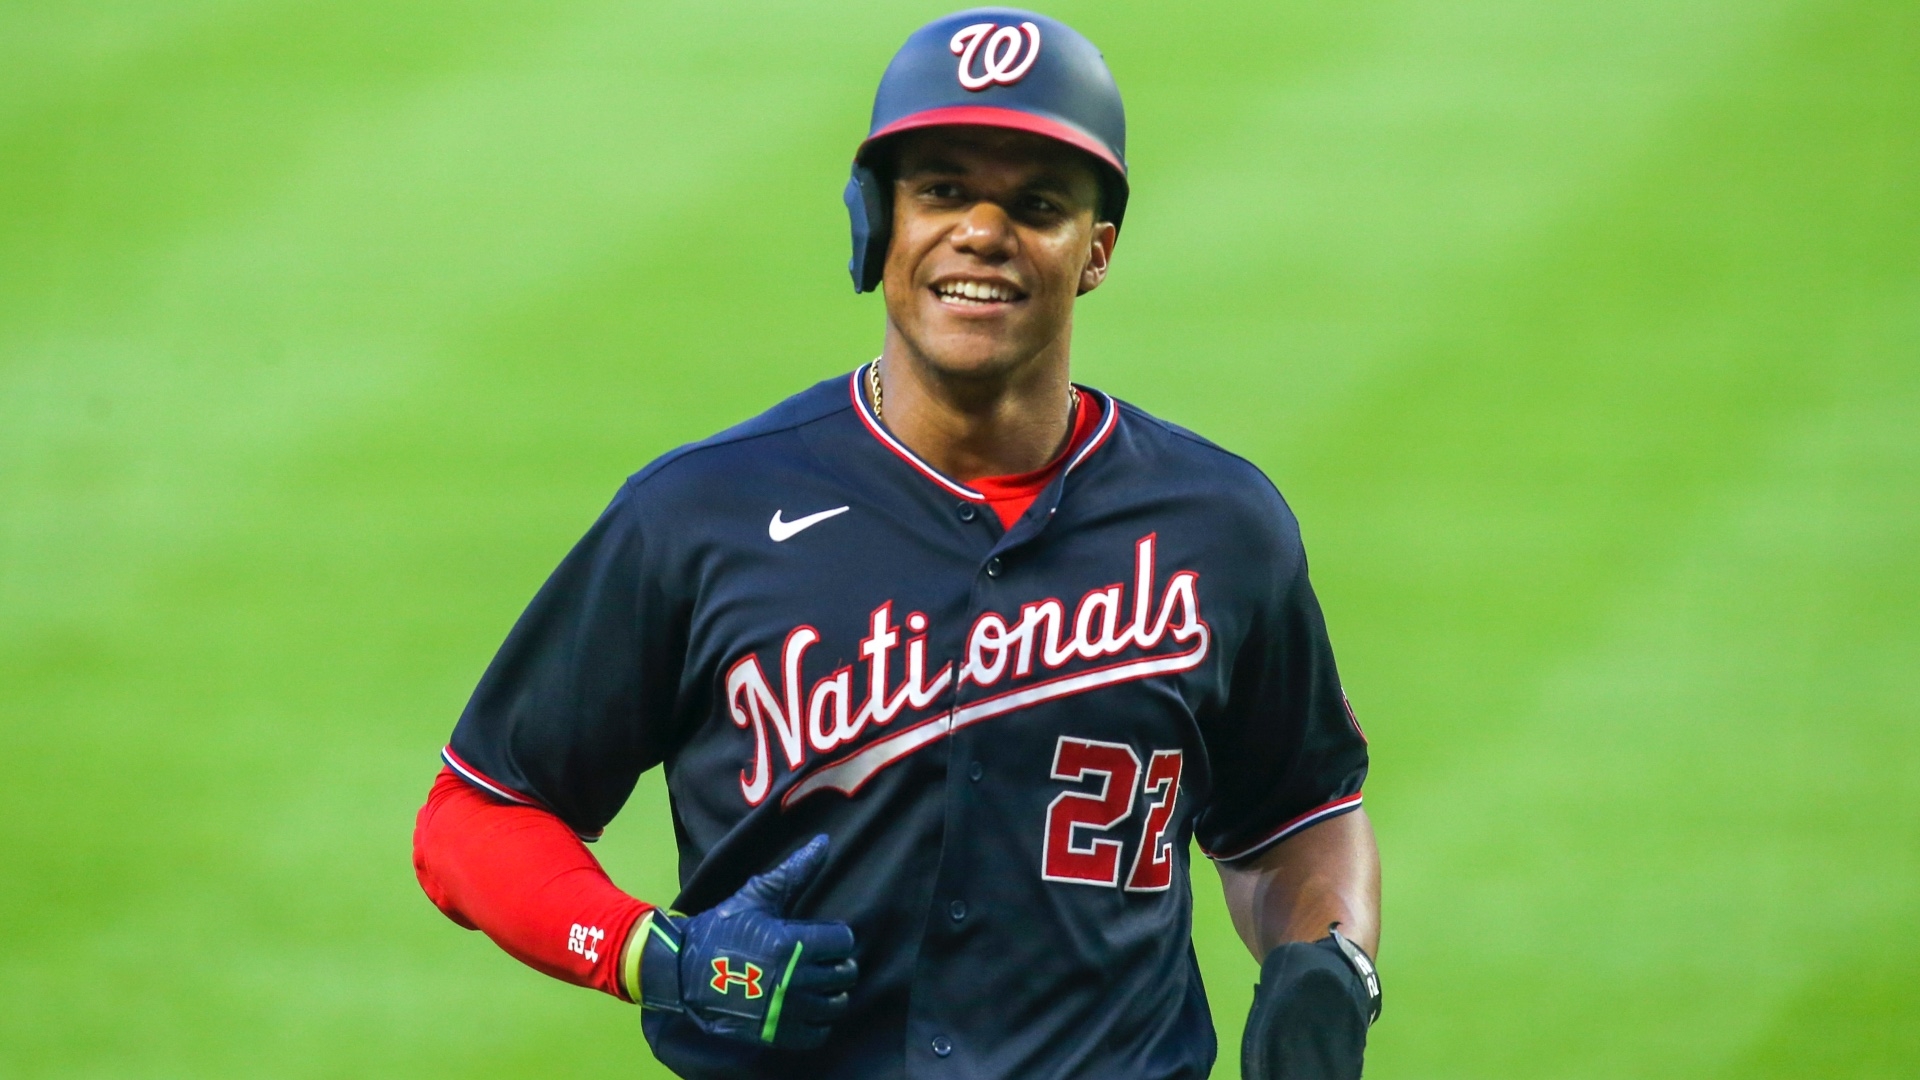 Padres new star Juan Soto MIC'D UP for in-game interview, has funny moment  with Trea Turner! 